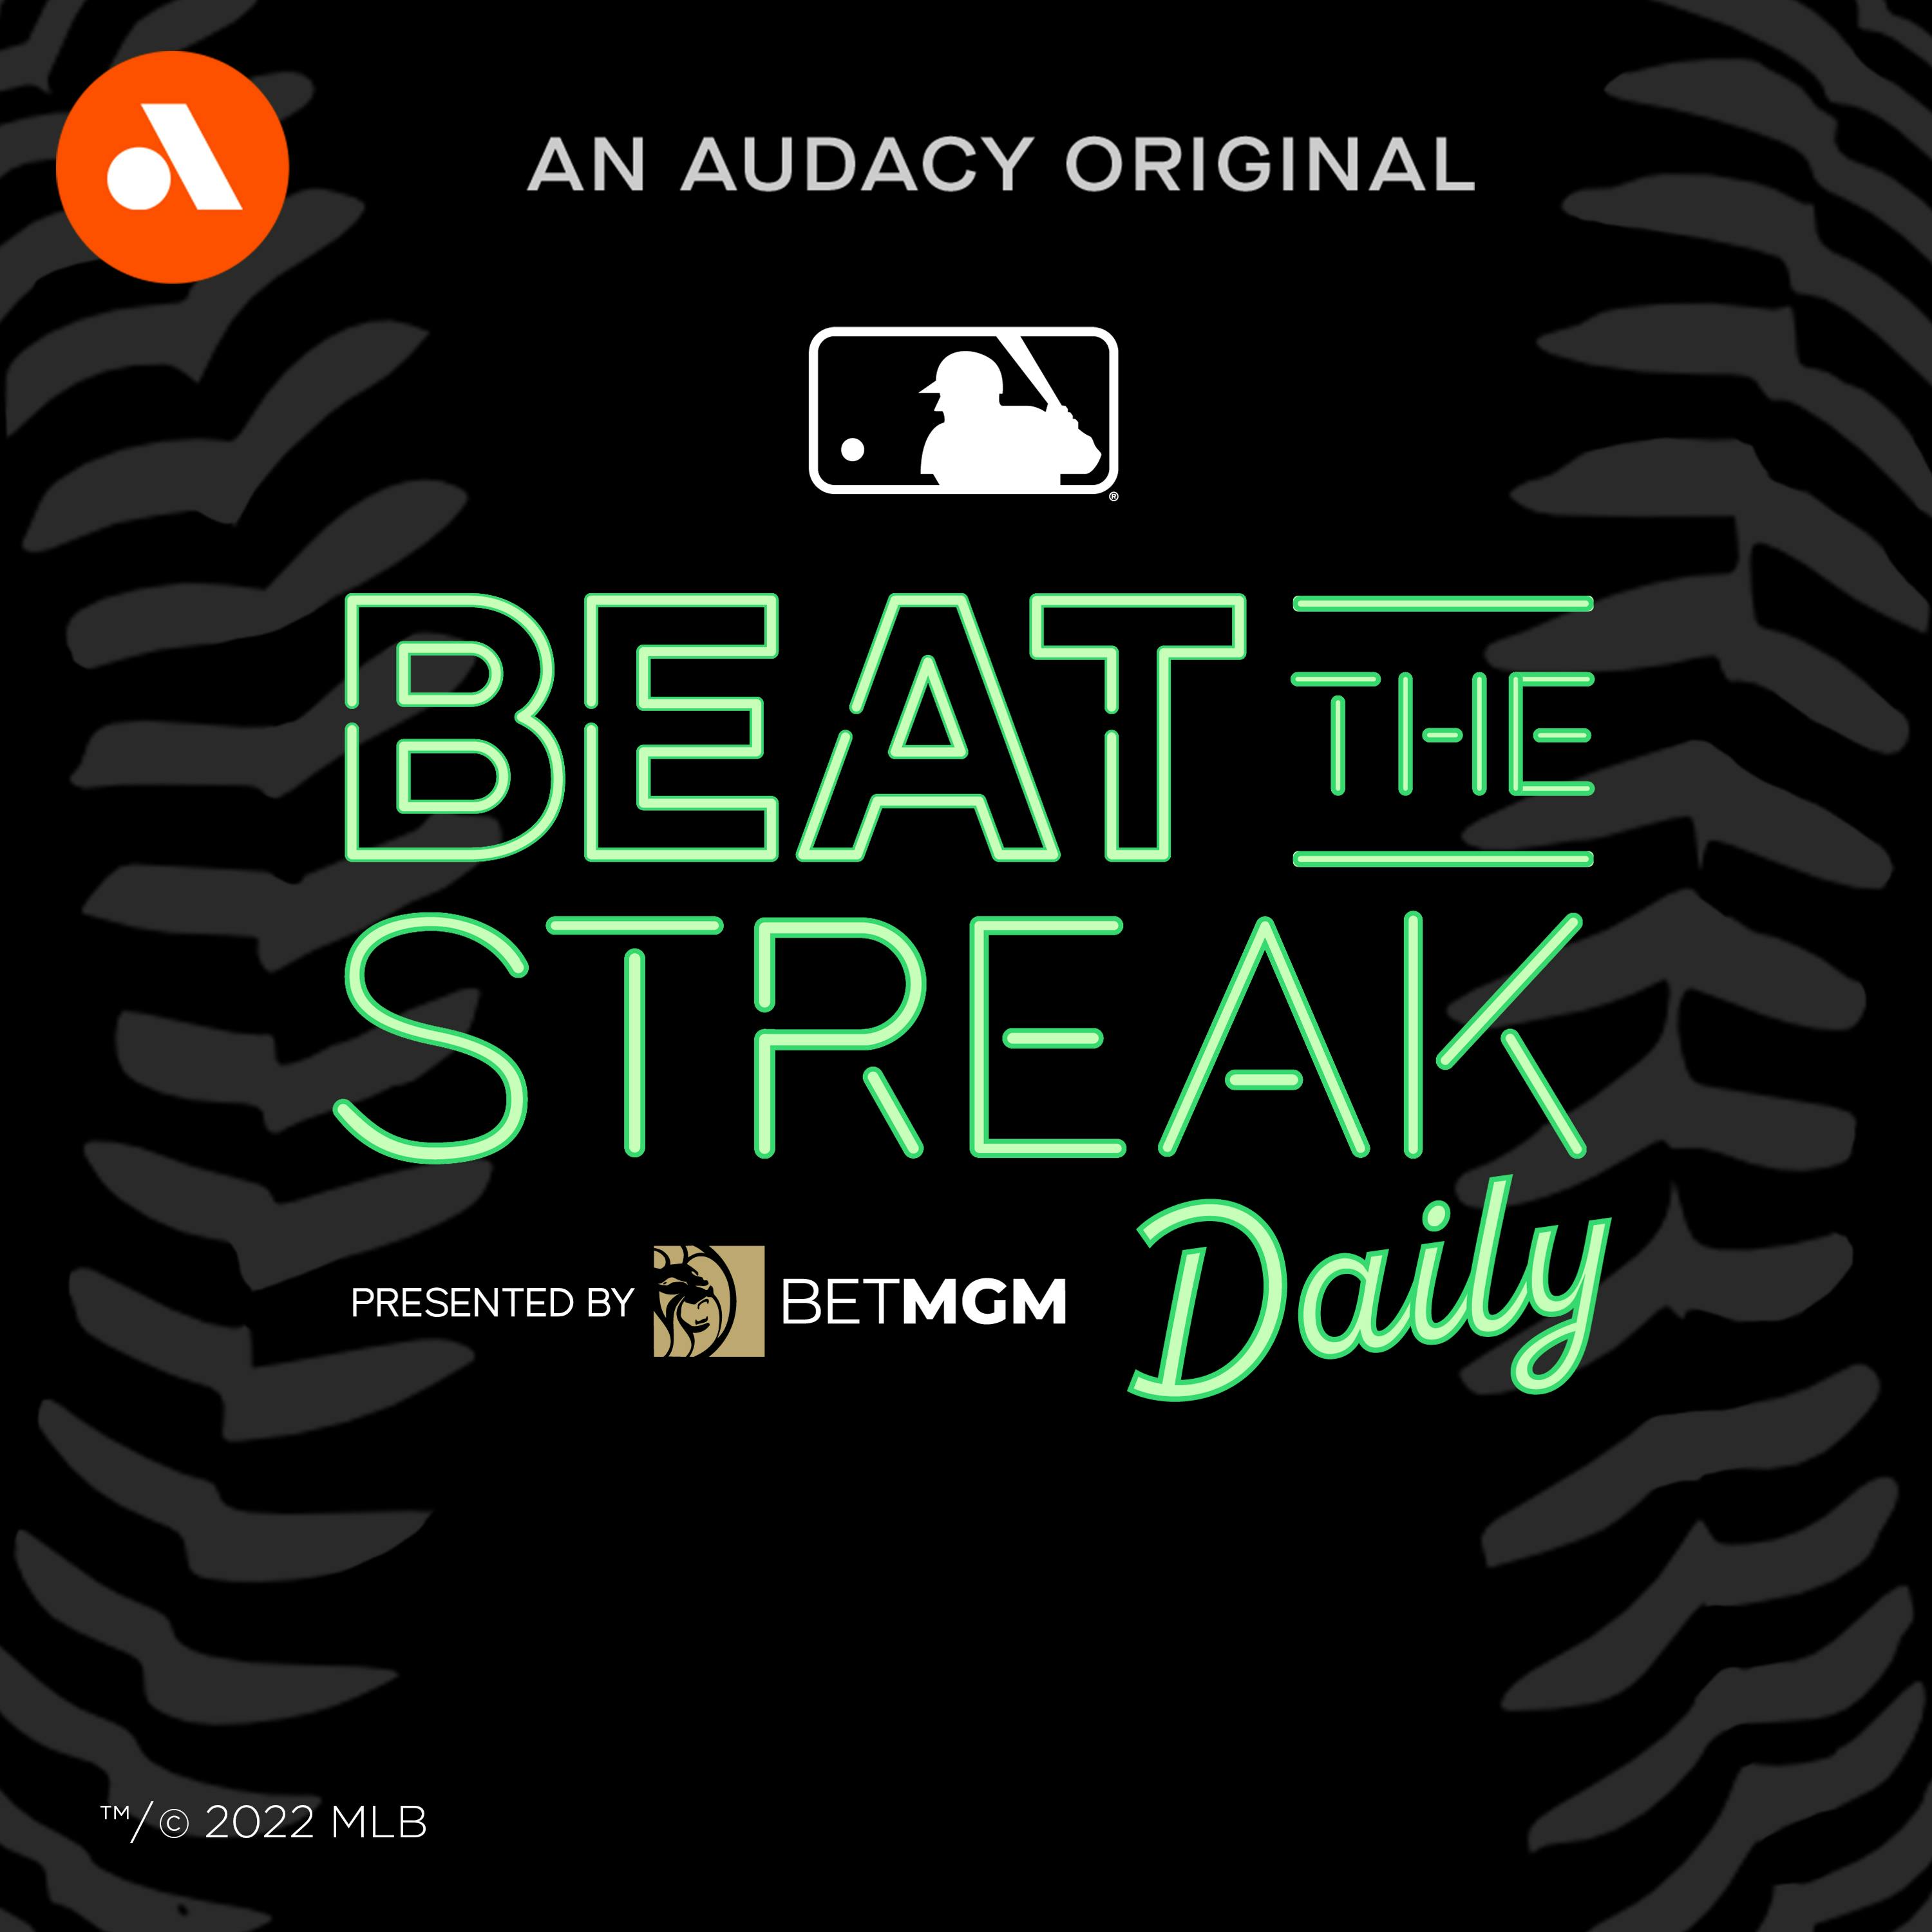 Beat the Streak Daily: Inside the Hits